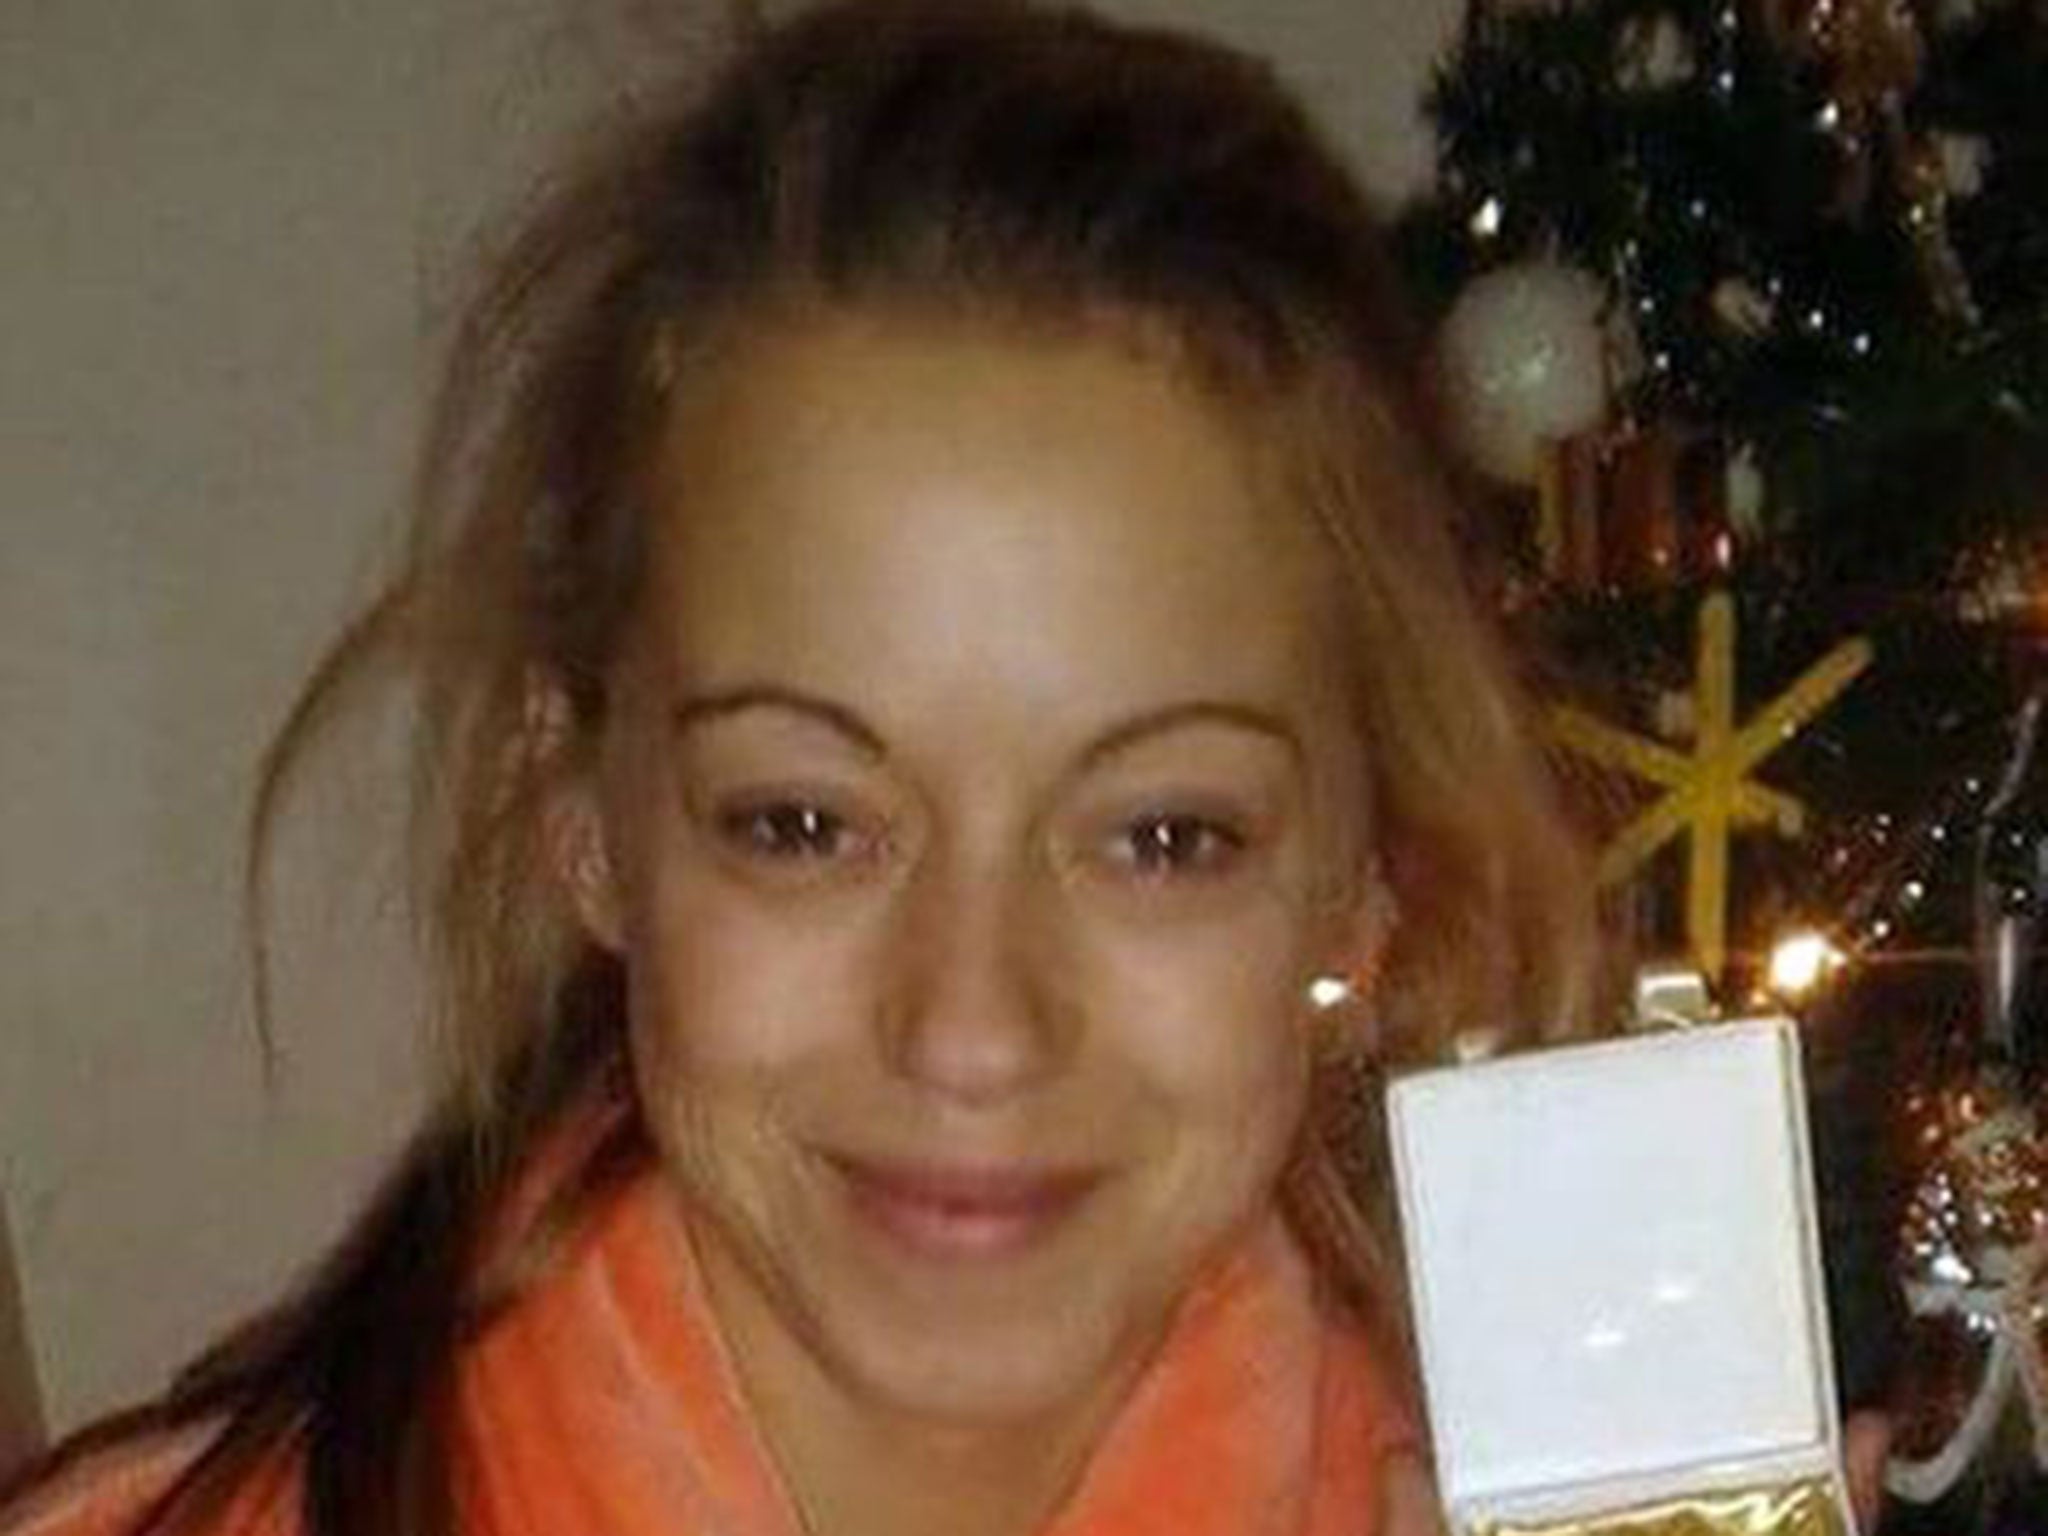 Samantha Henderson was last seen on the afternoon of January 21